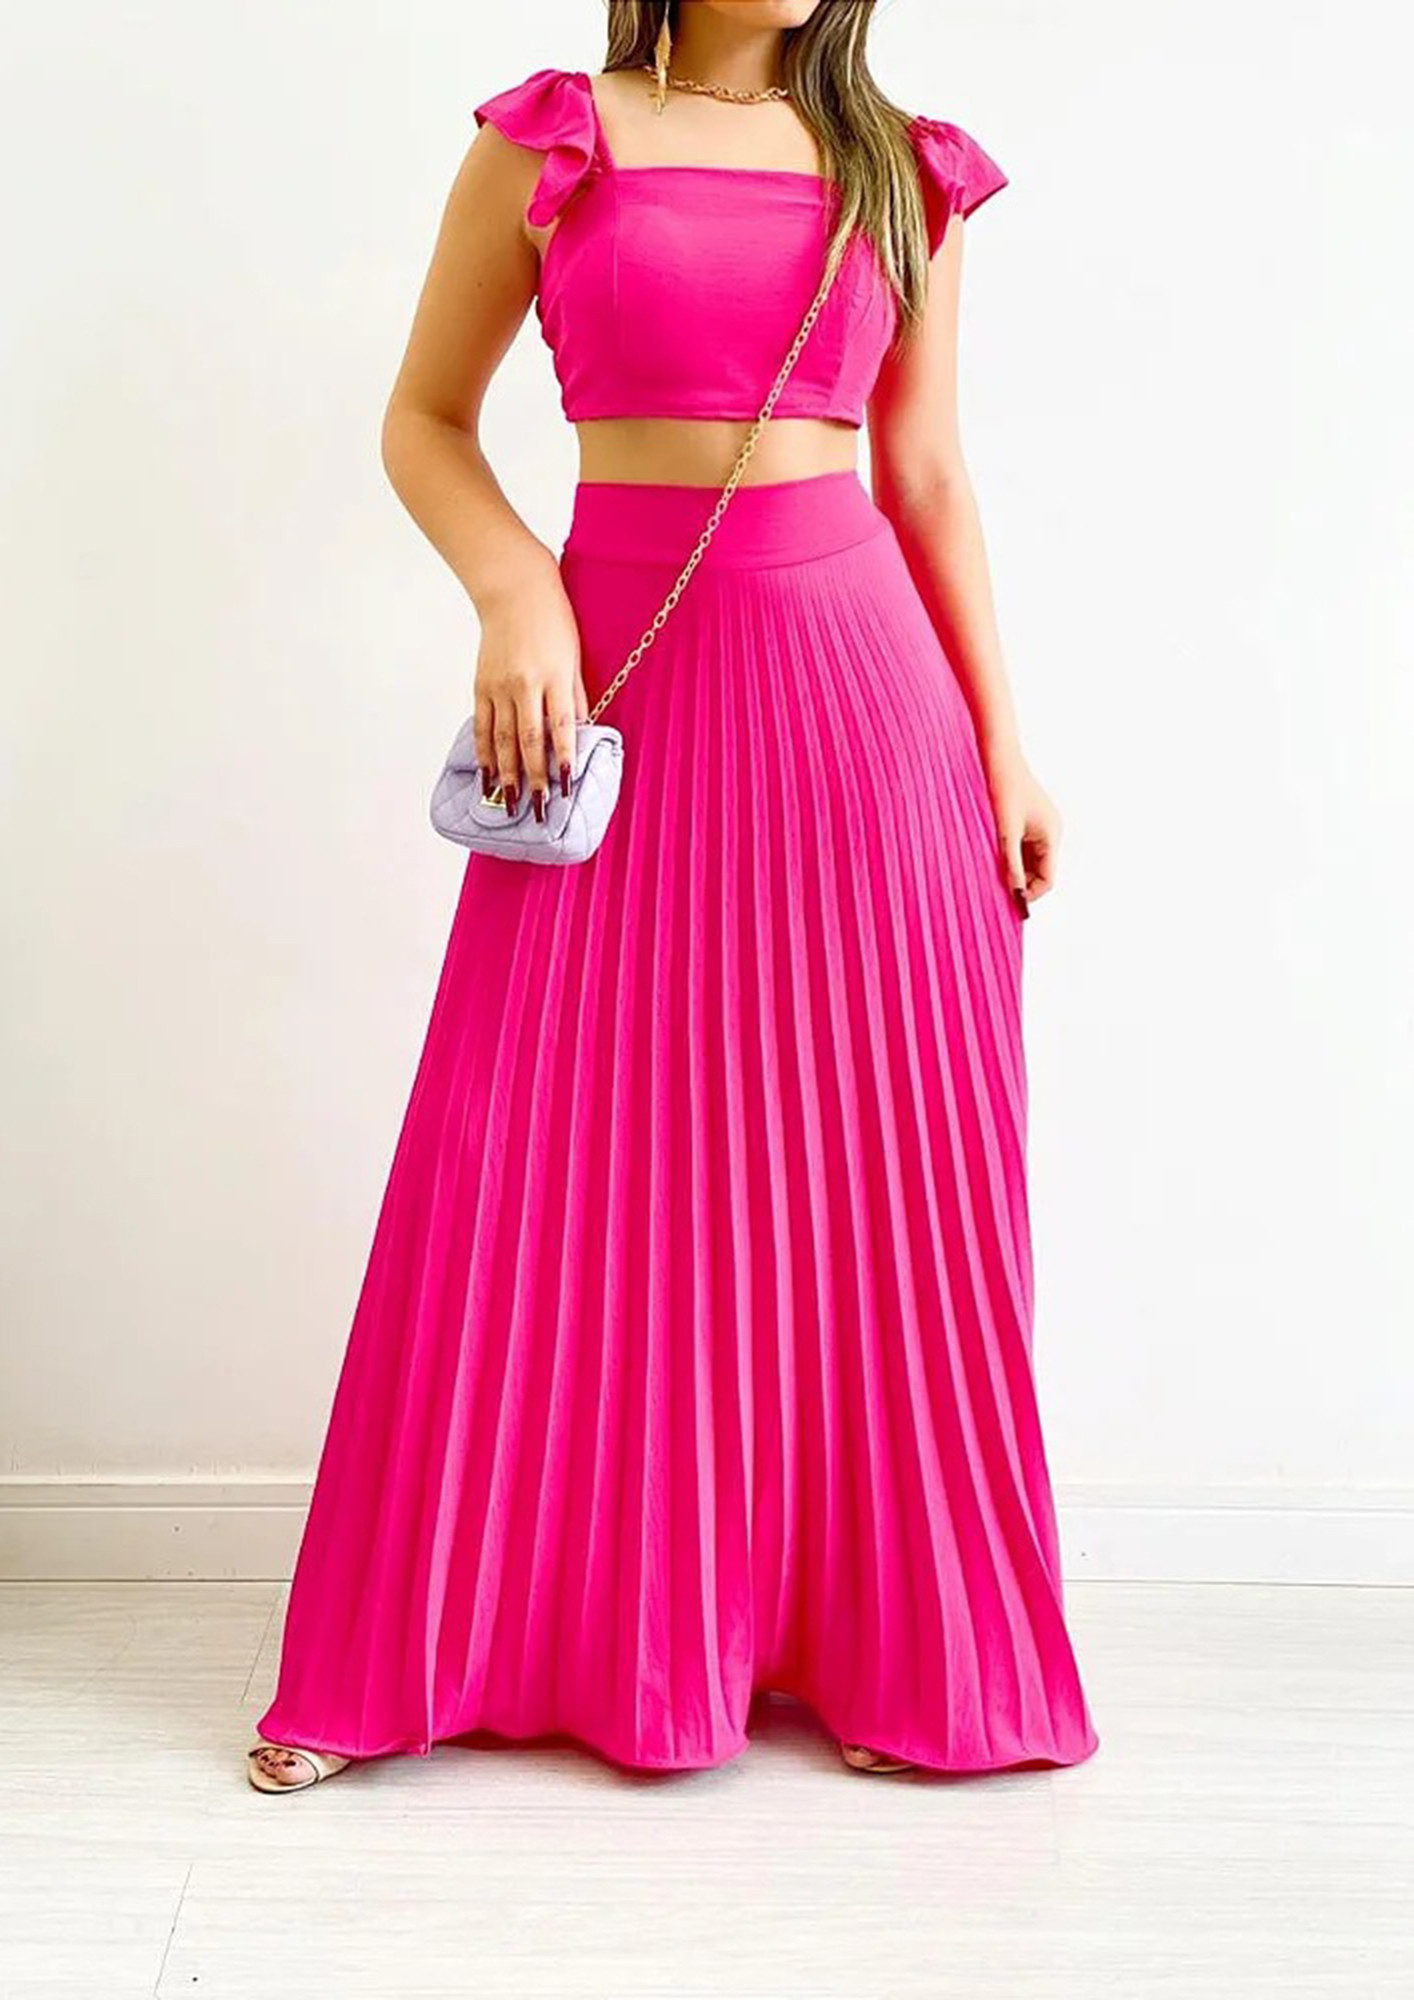 The Coolest Crop Tops and Long Skirts Outfit (2022) – topsfordays